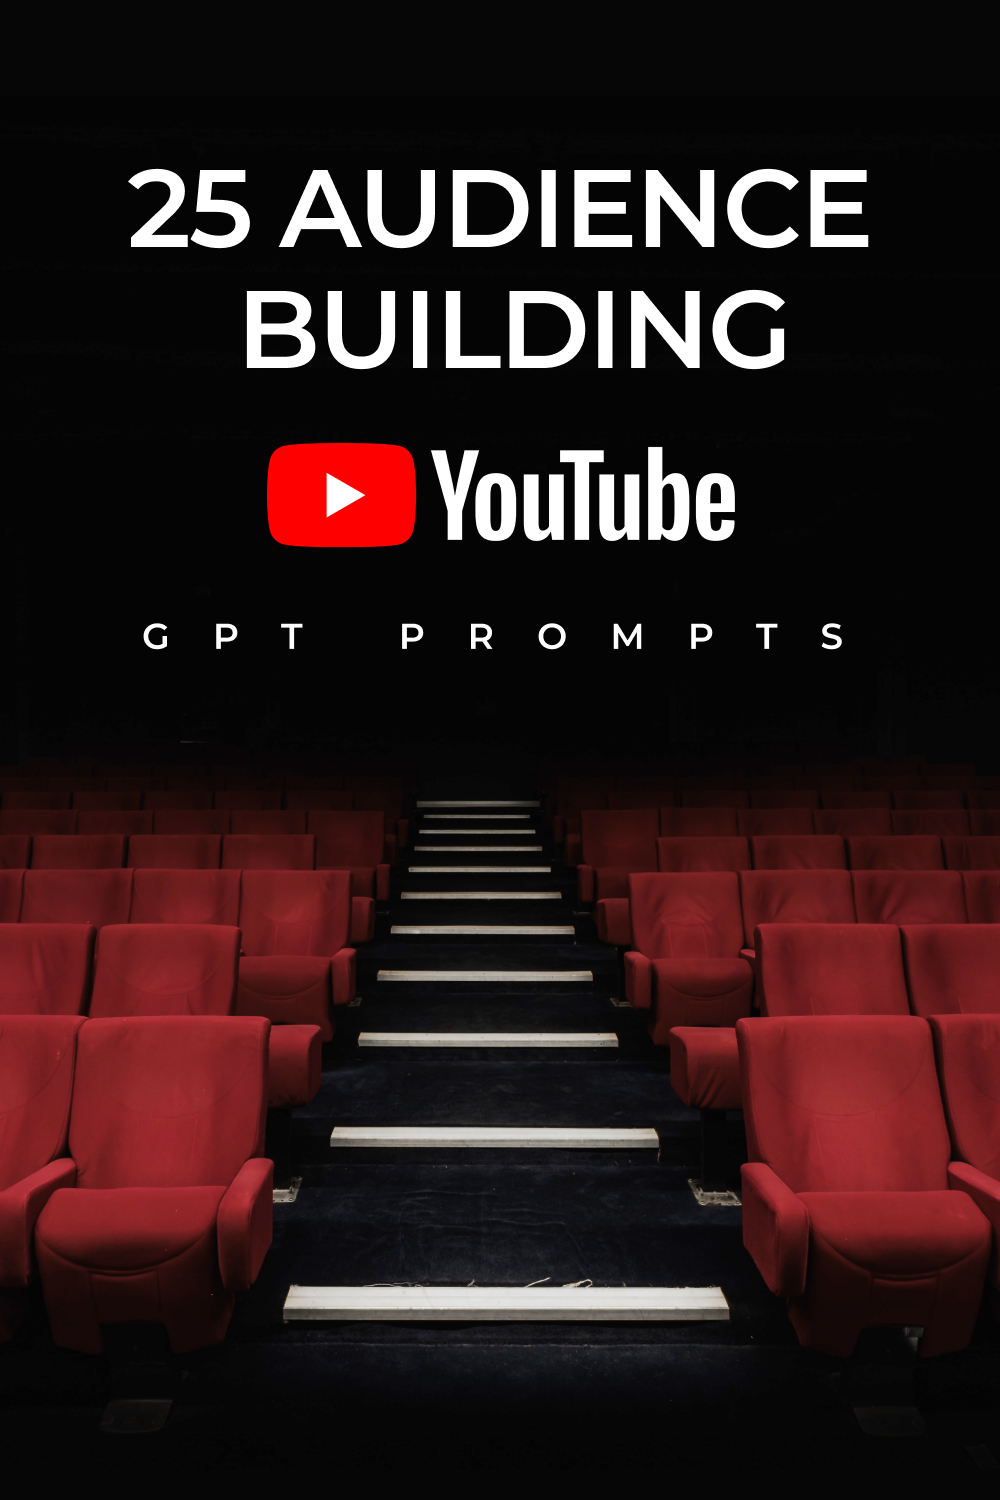 25 audience building youtube 1000 1500 118